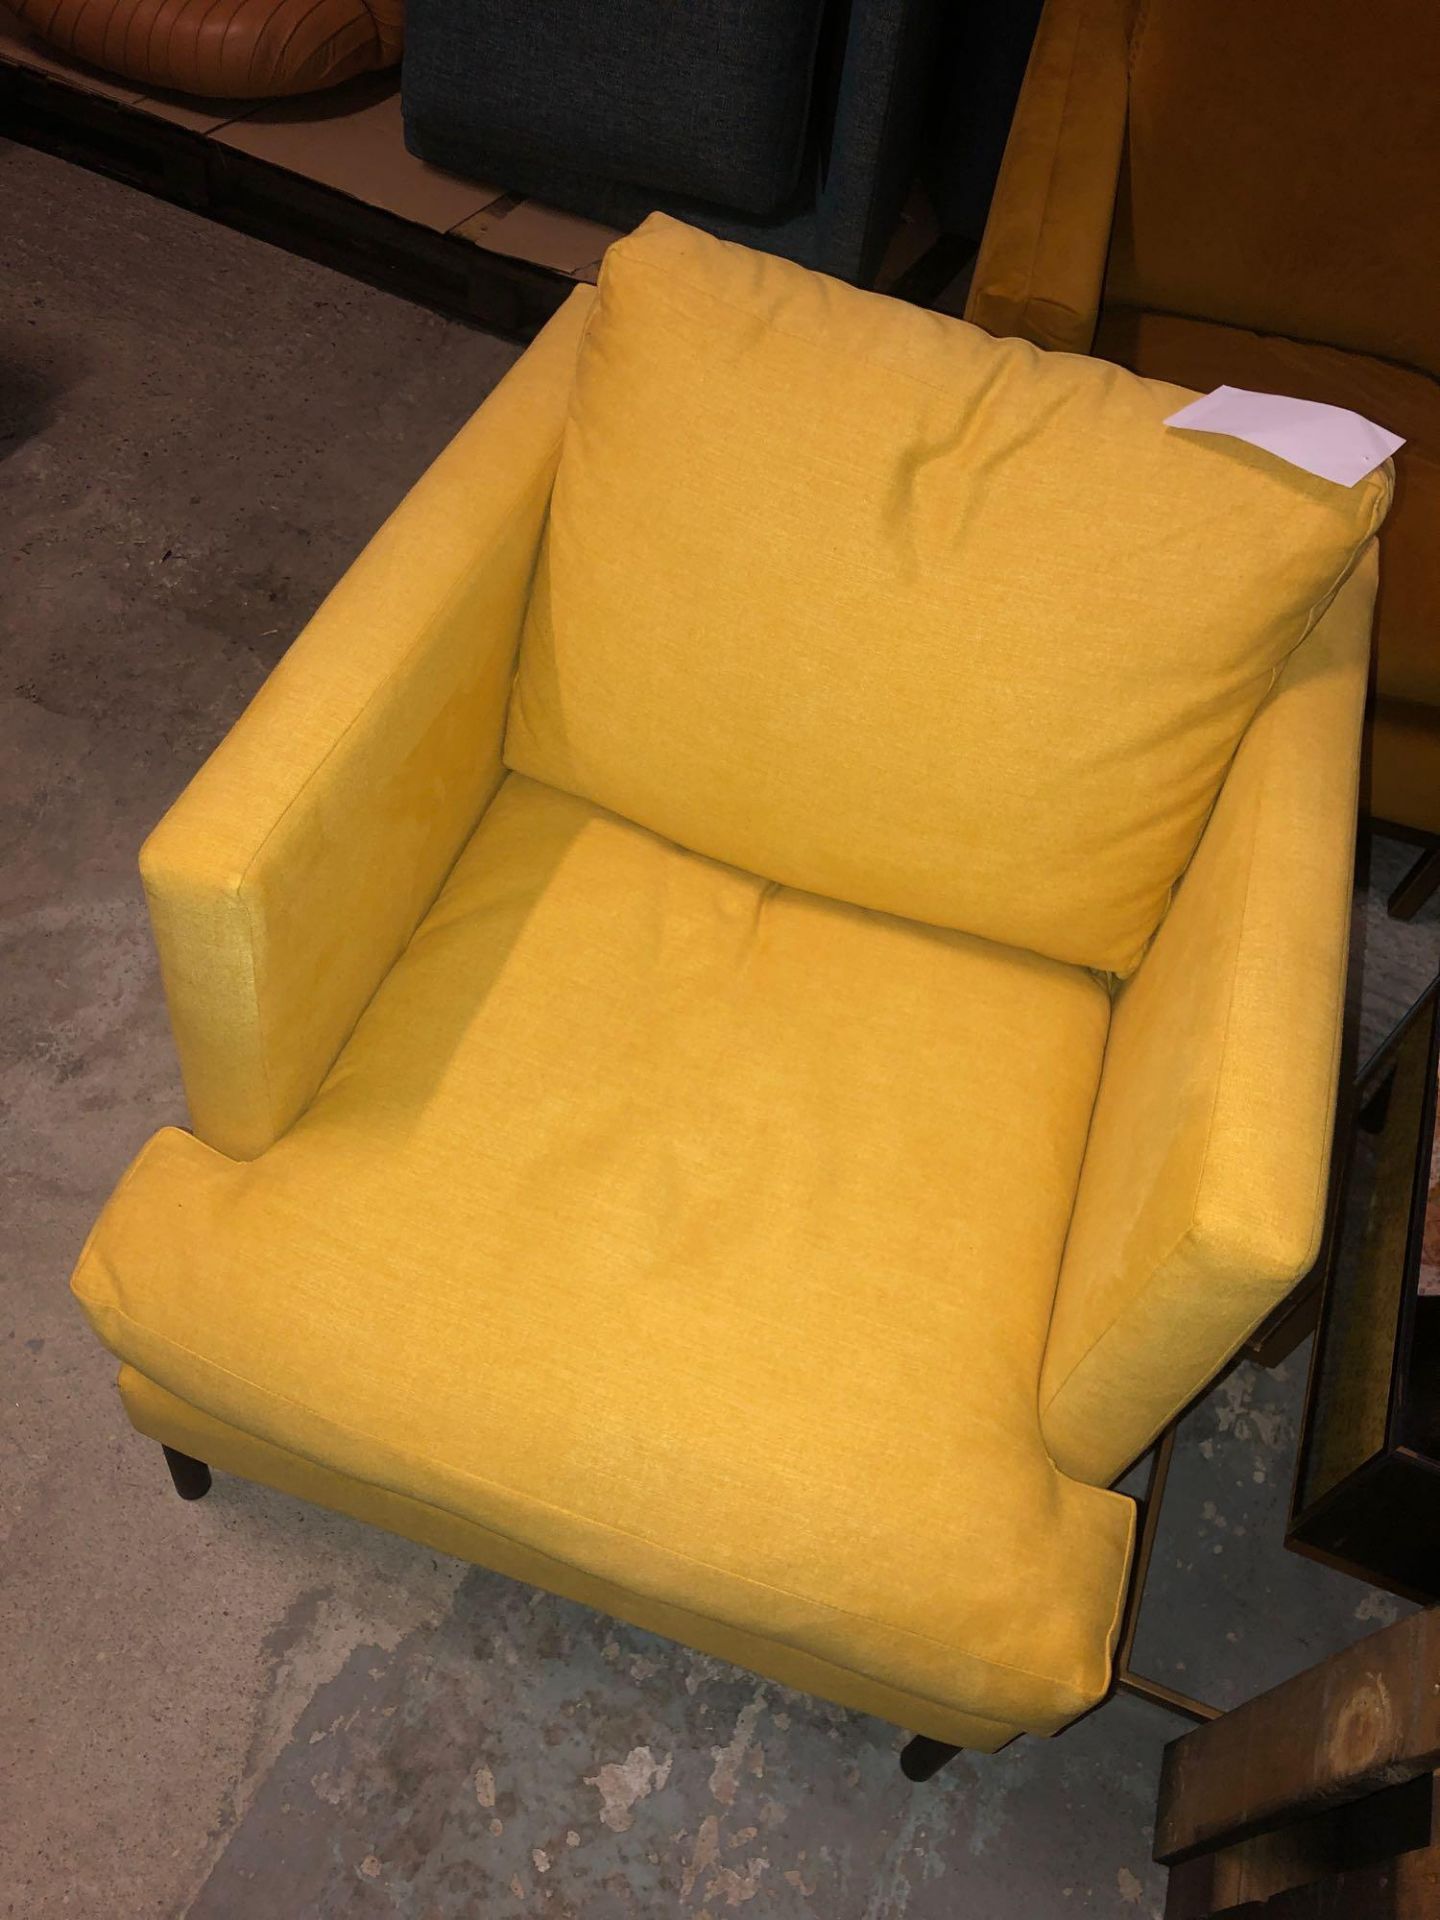 Dulwich Armchair Modena Ochre Complete The Apartment Living Look With Our Dulwich Collection - Image 3 of 3